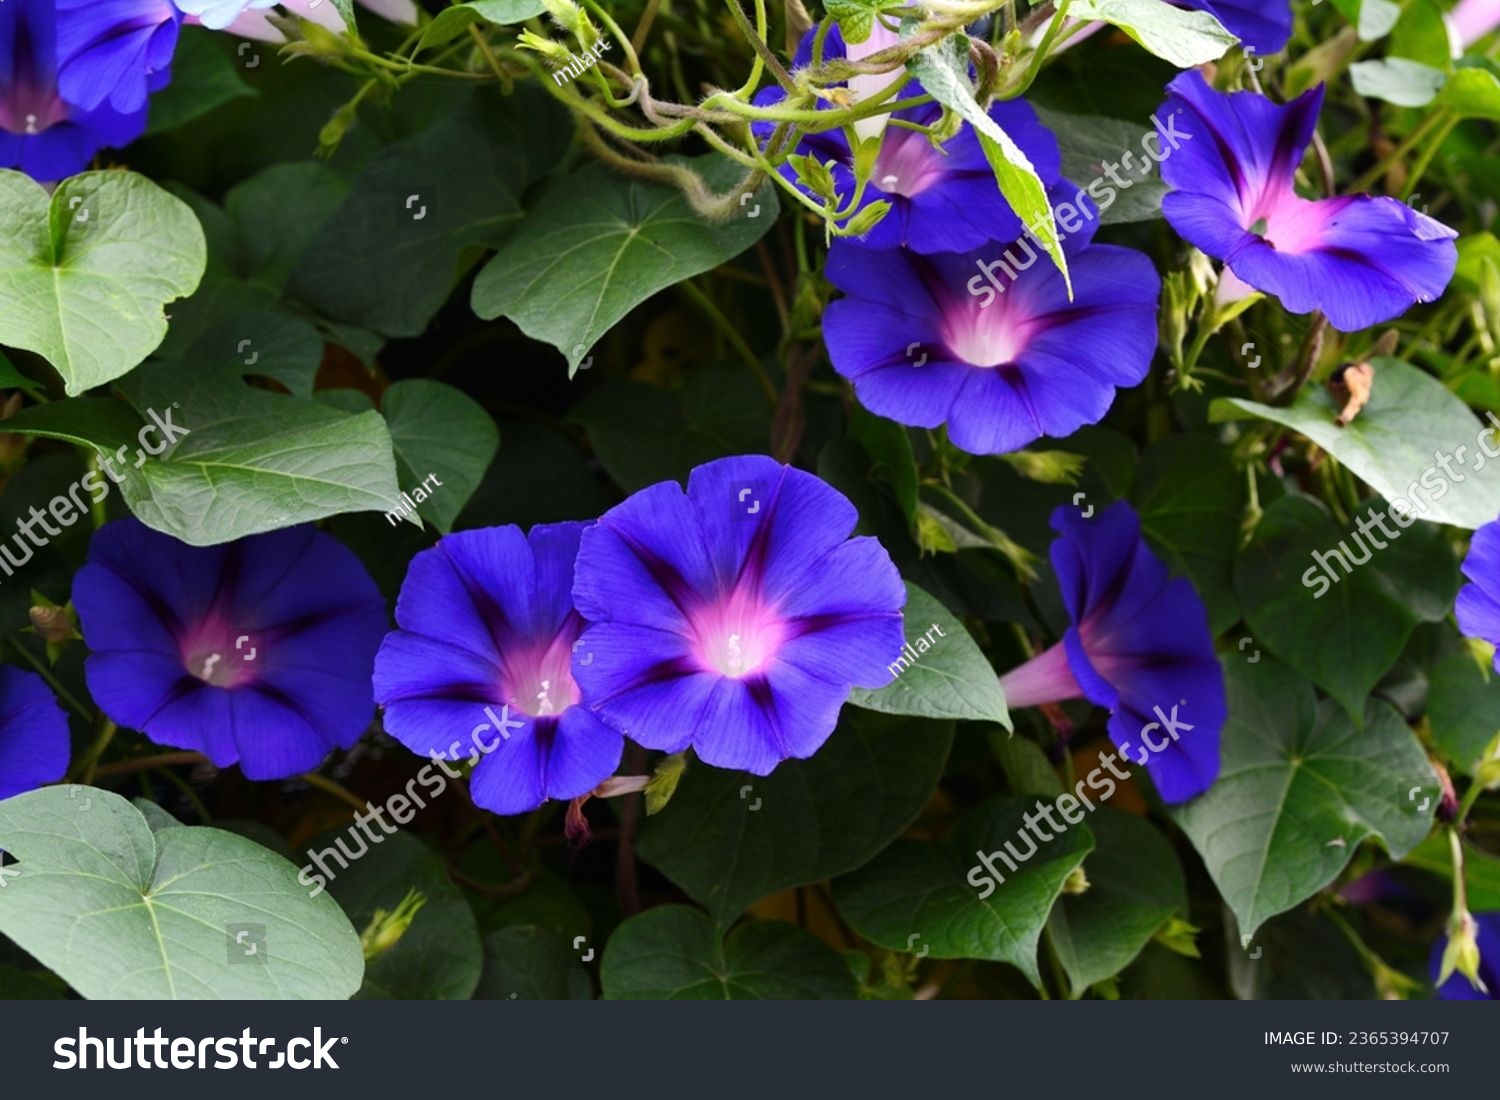 beautiful blue morning glory flowers. Ipomoea indica is a species of flowering plant in the family Convolvulaceae, known by several common names, including Blue morning glory, Oceanblue morning glory #2365394707